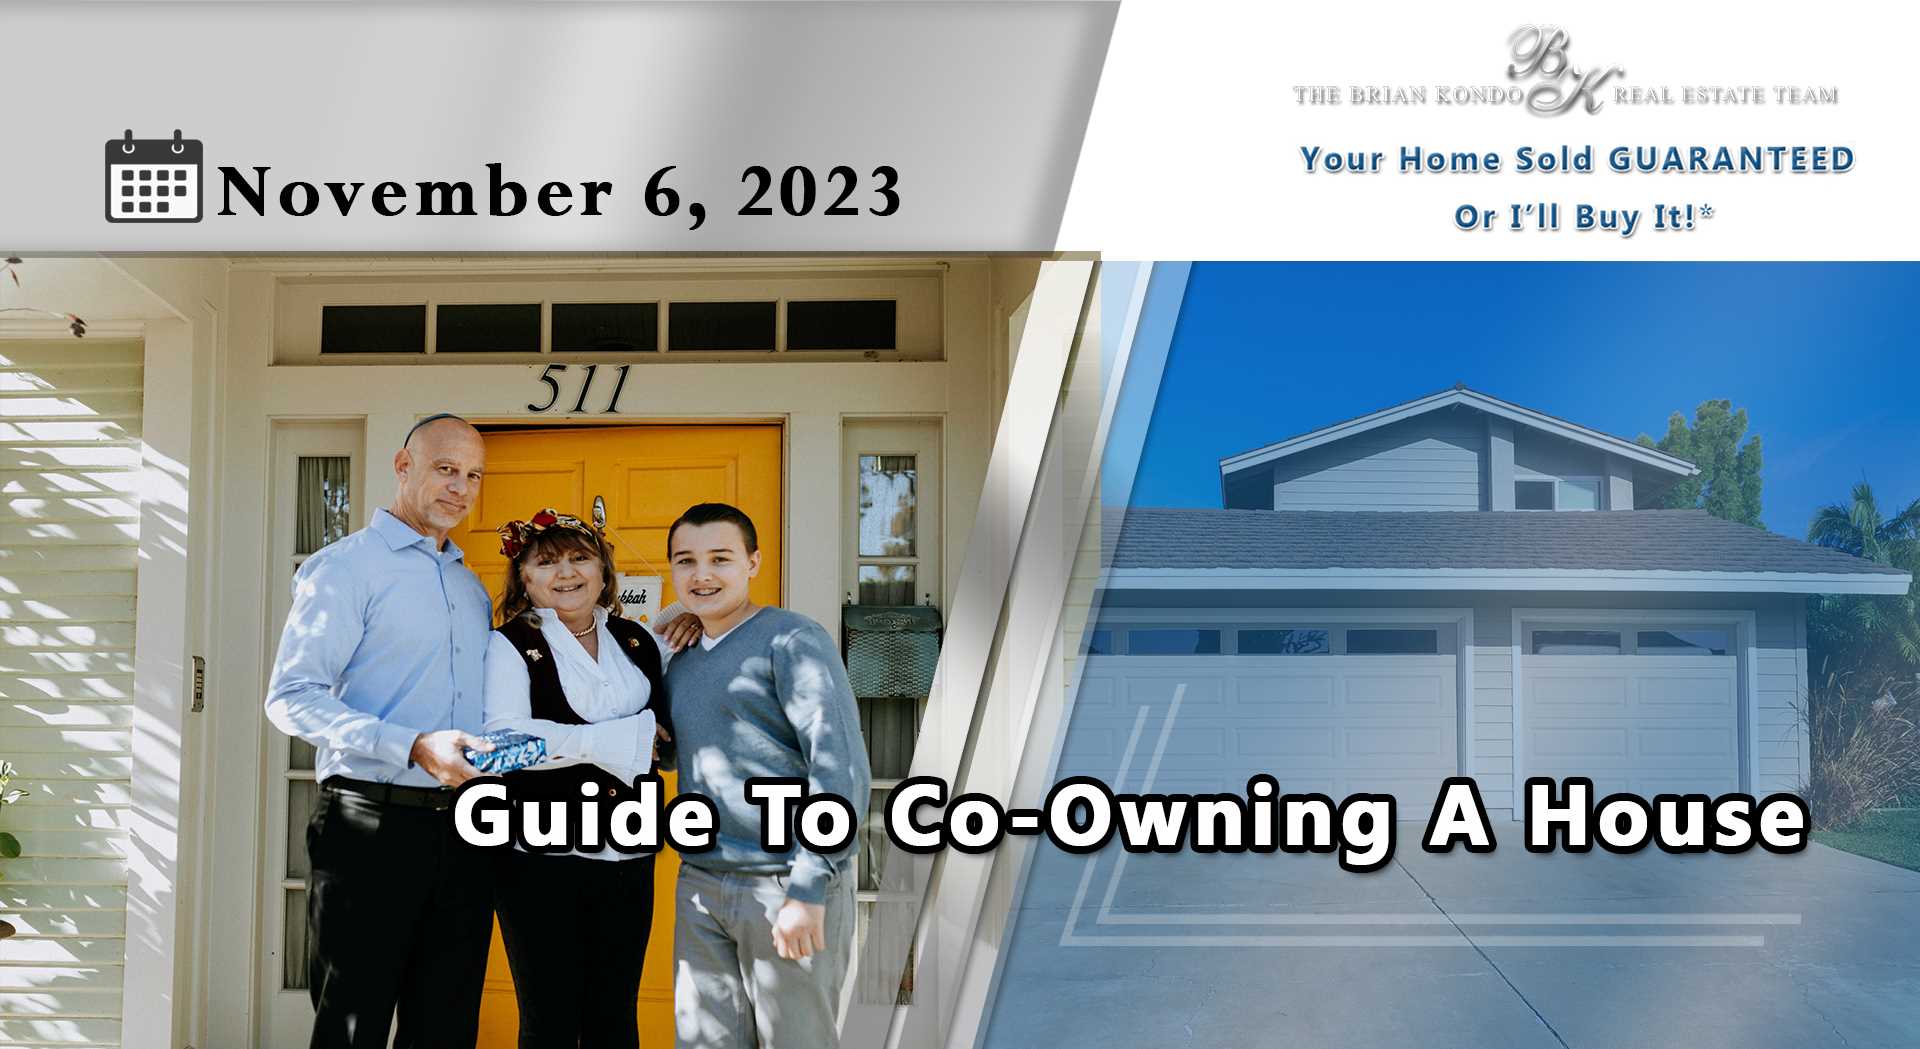 Guide To Co-Owning A House